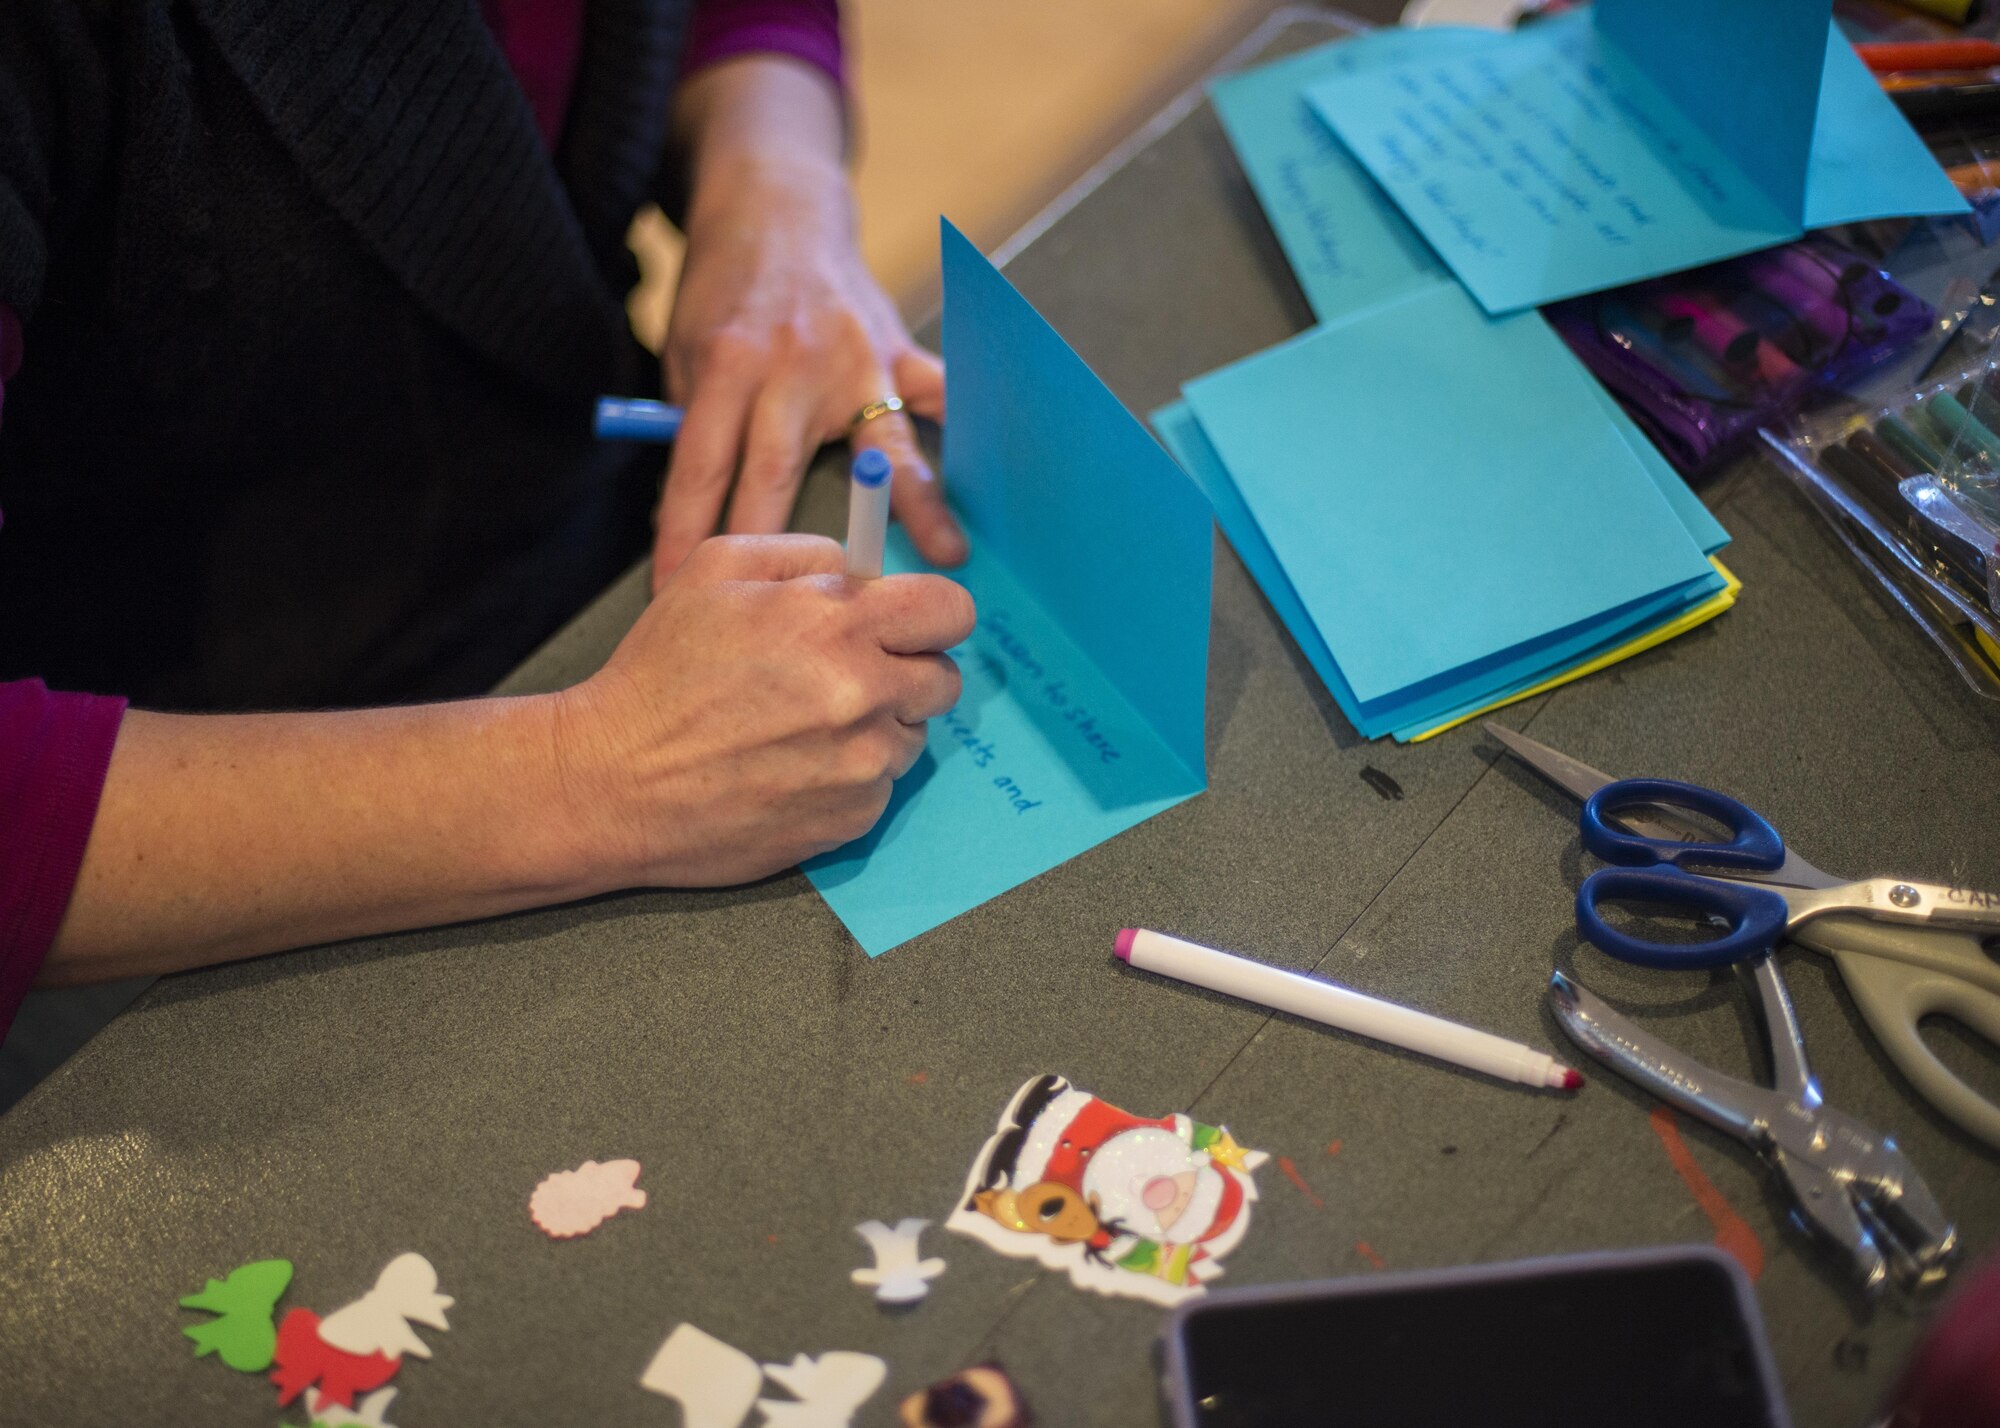 A volunteer crafts a handmade card, to adorn a package of cookies, for Holloman’s annual Airman Cookie Drive at the Community Activity Center at Holloman Air Force Base, N.M. on Dec 5, 2016. Cookie drive volunteers collected cookies from donors, organized cookies according to type, dispersed cookies into individual paper bags, and attached handmade cards to each bag of cookies. (U.S. Air Force photo by Airman 1st Class Alexis P. Docherty) 